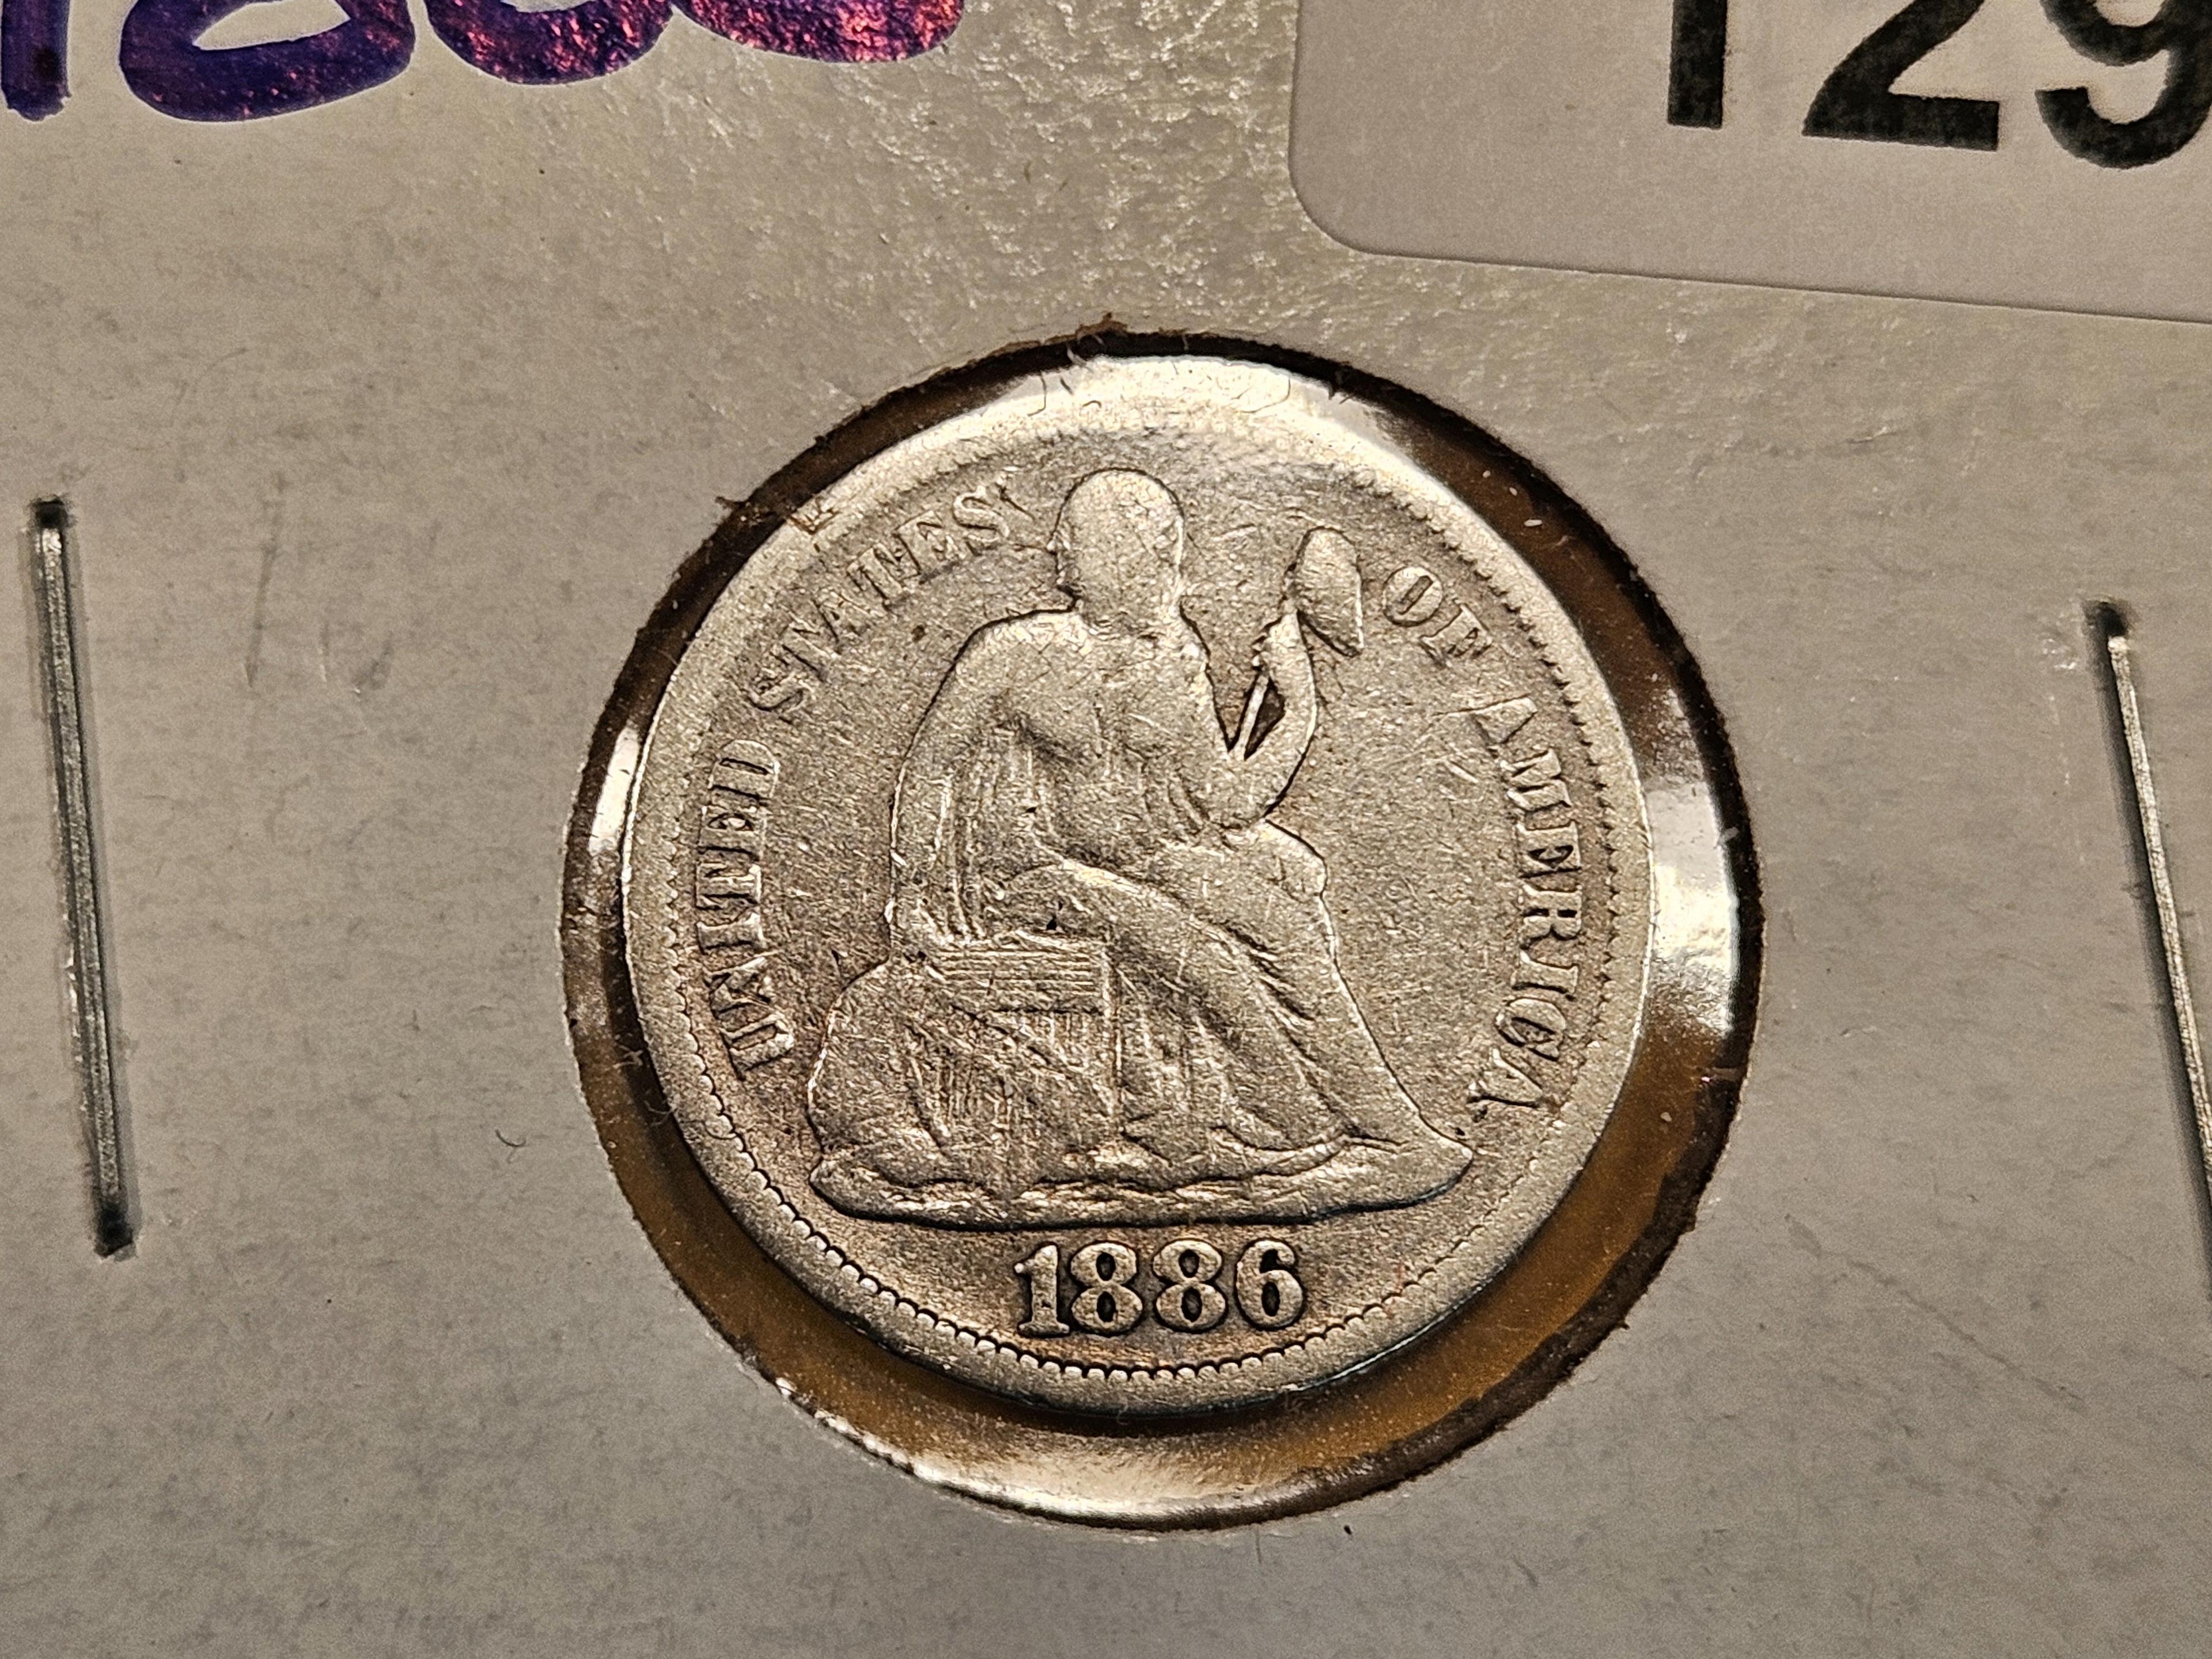 1884 and 1886 Seated Liberty Dimes